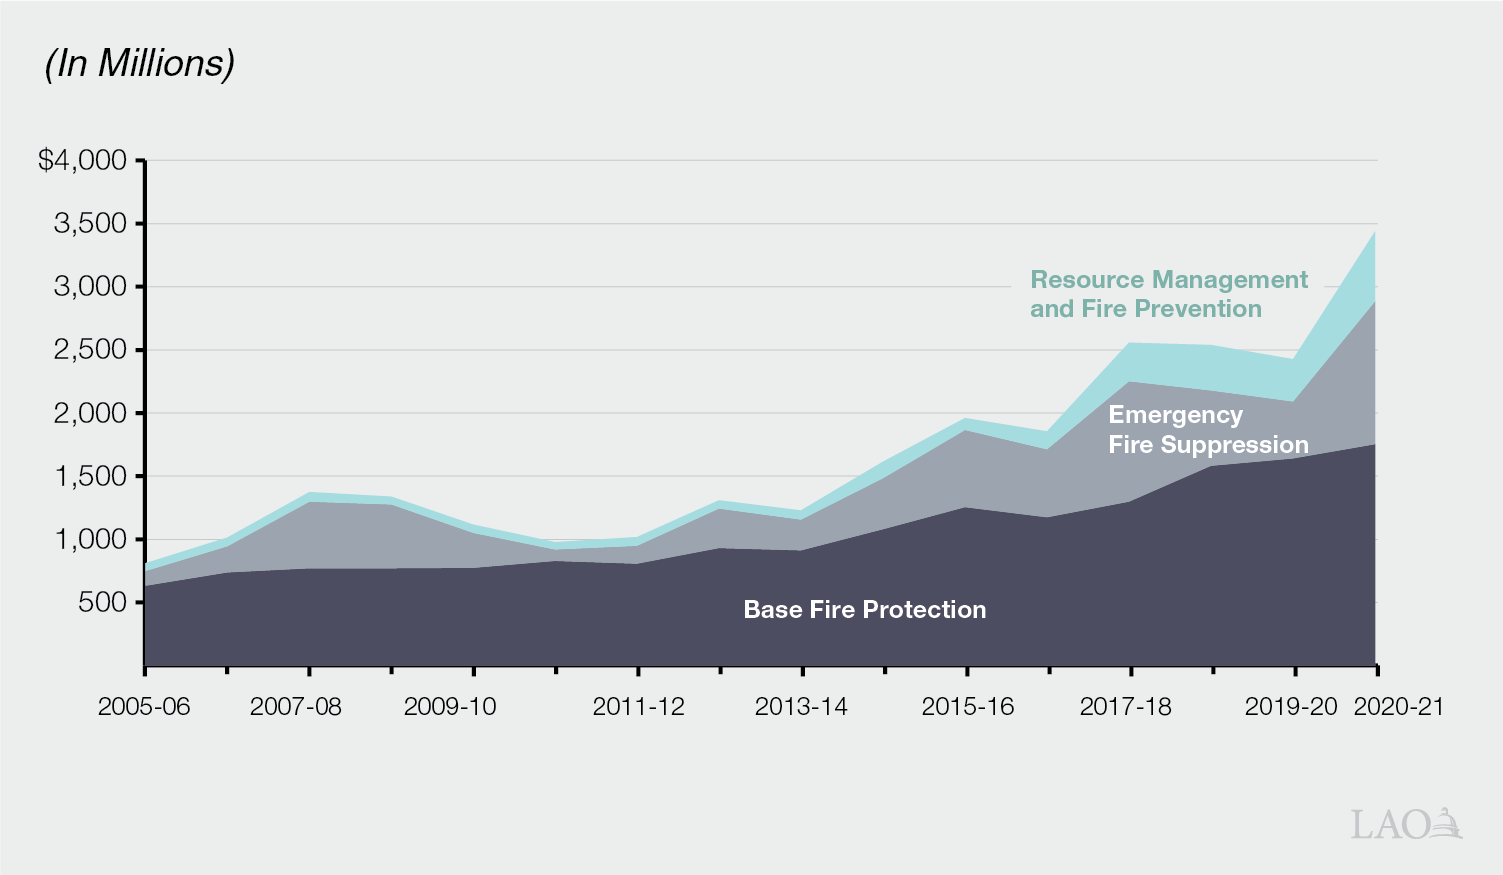 Spending on Wildfire Response and Prevention Activities